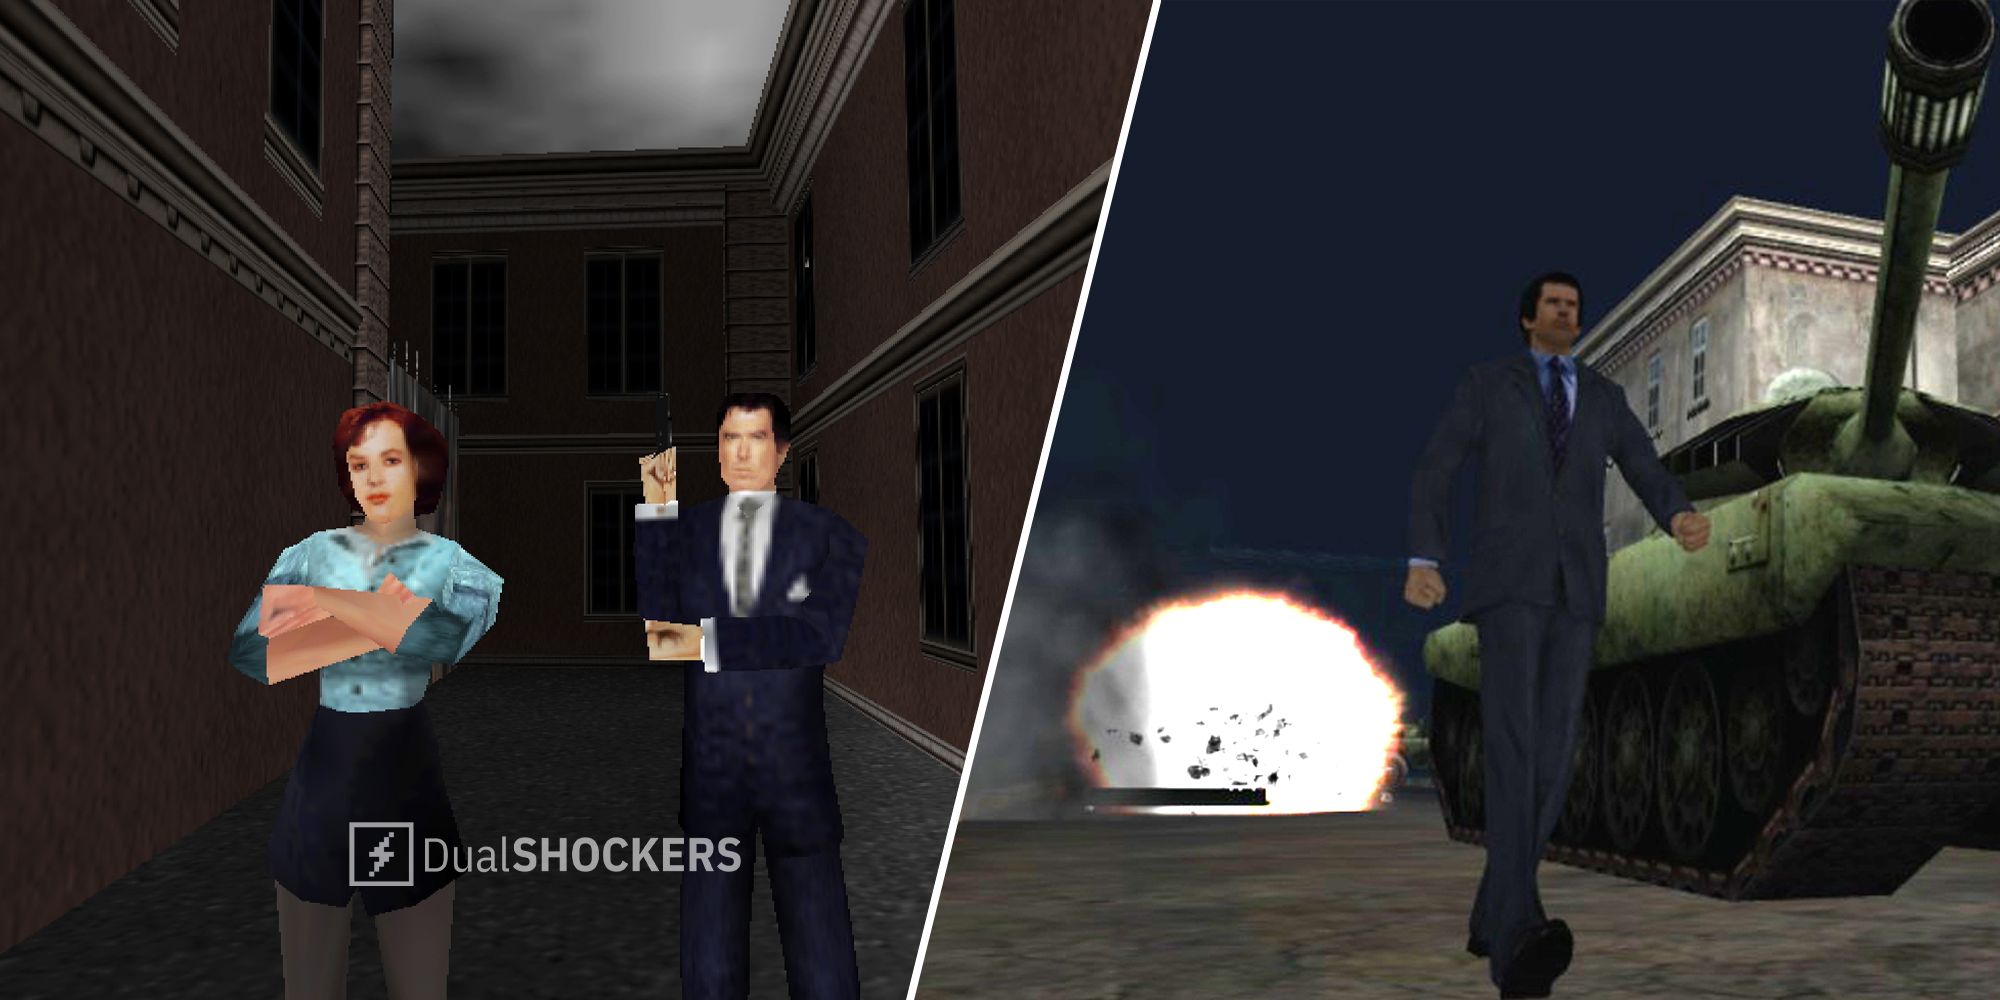 Goldeneye split screen - Can you play on Switch and Xbox?